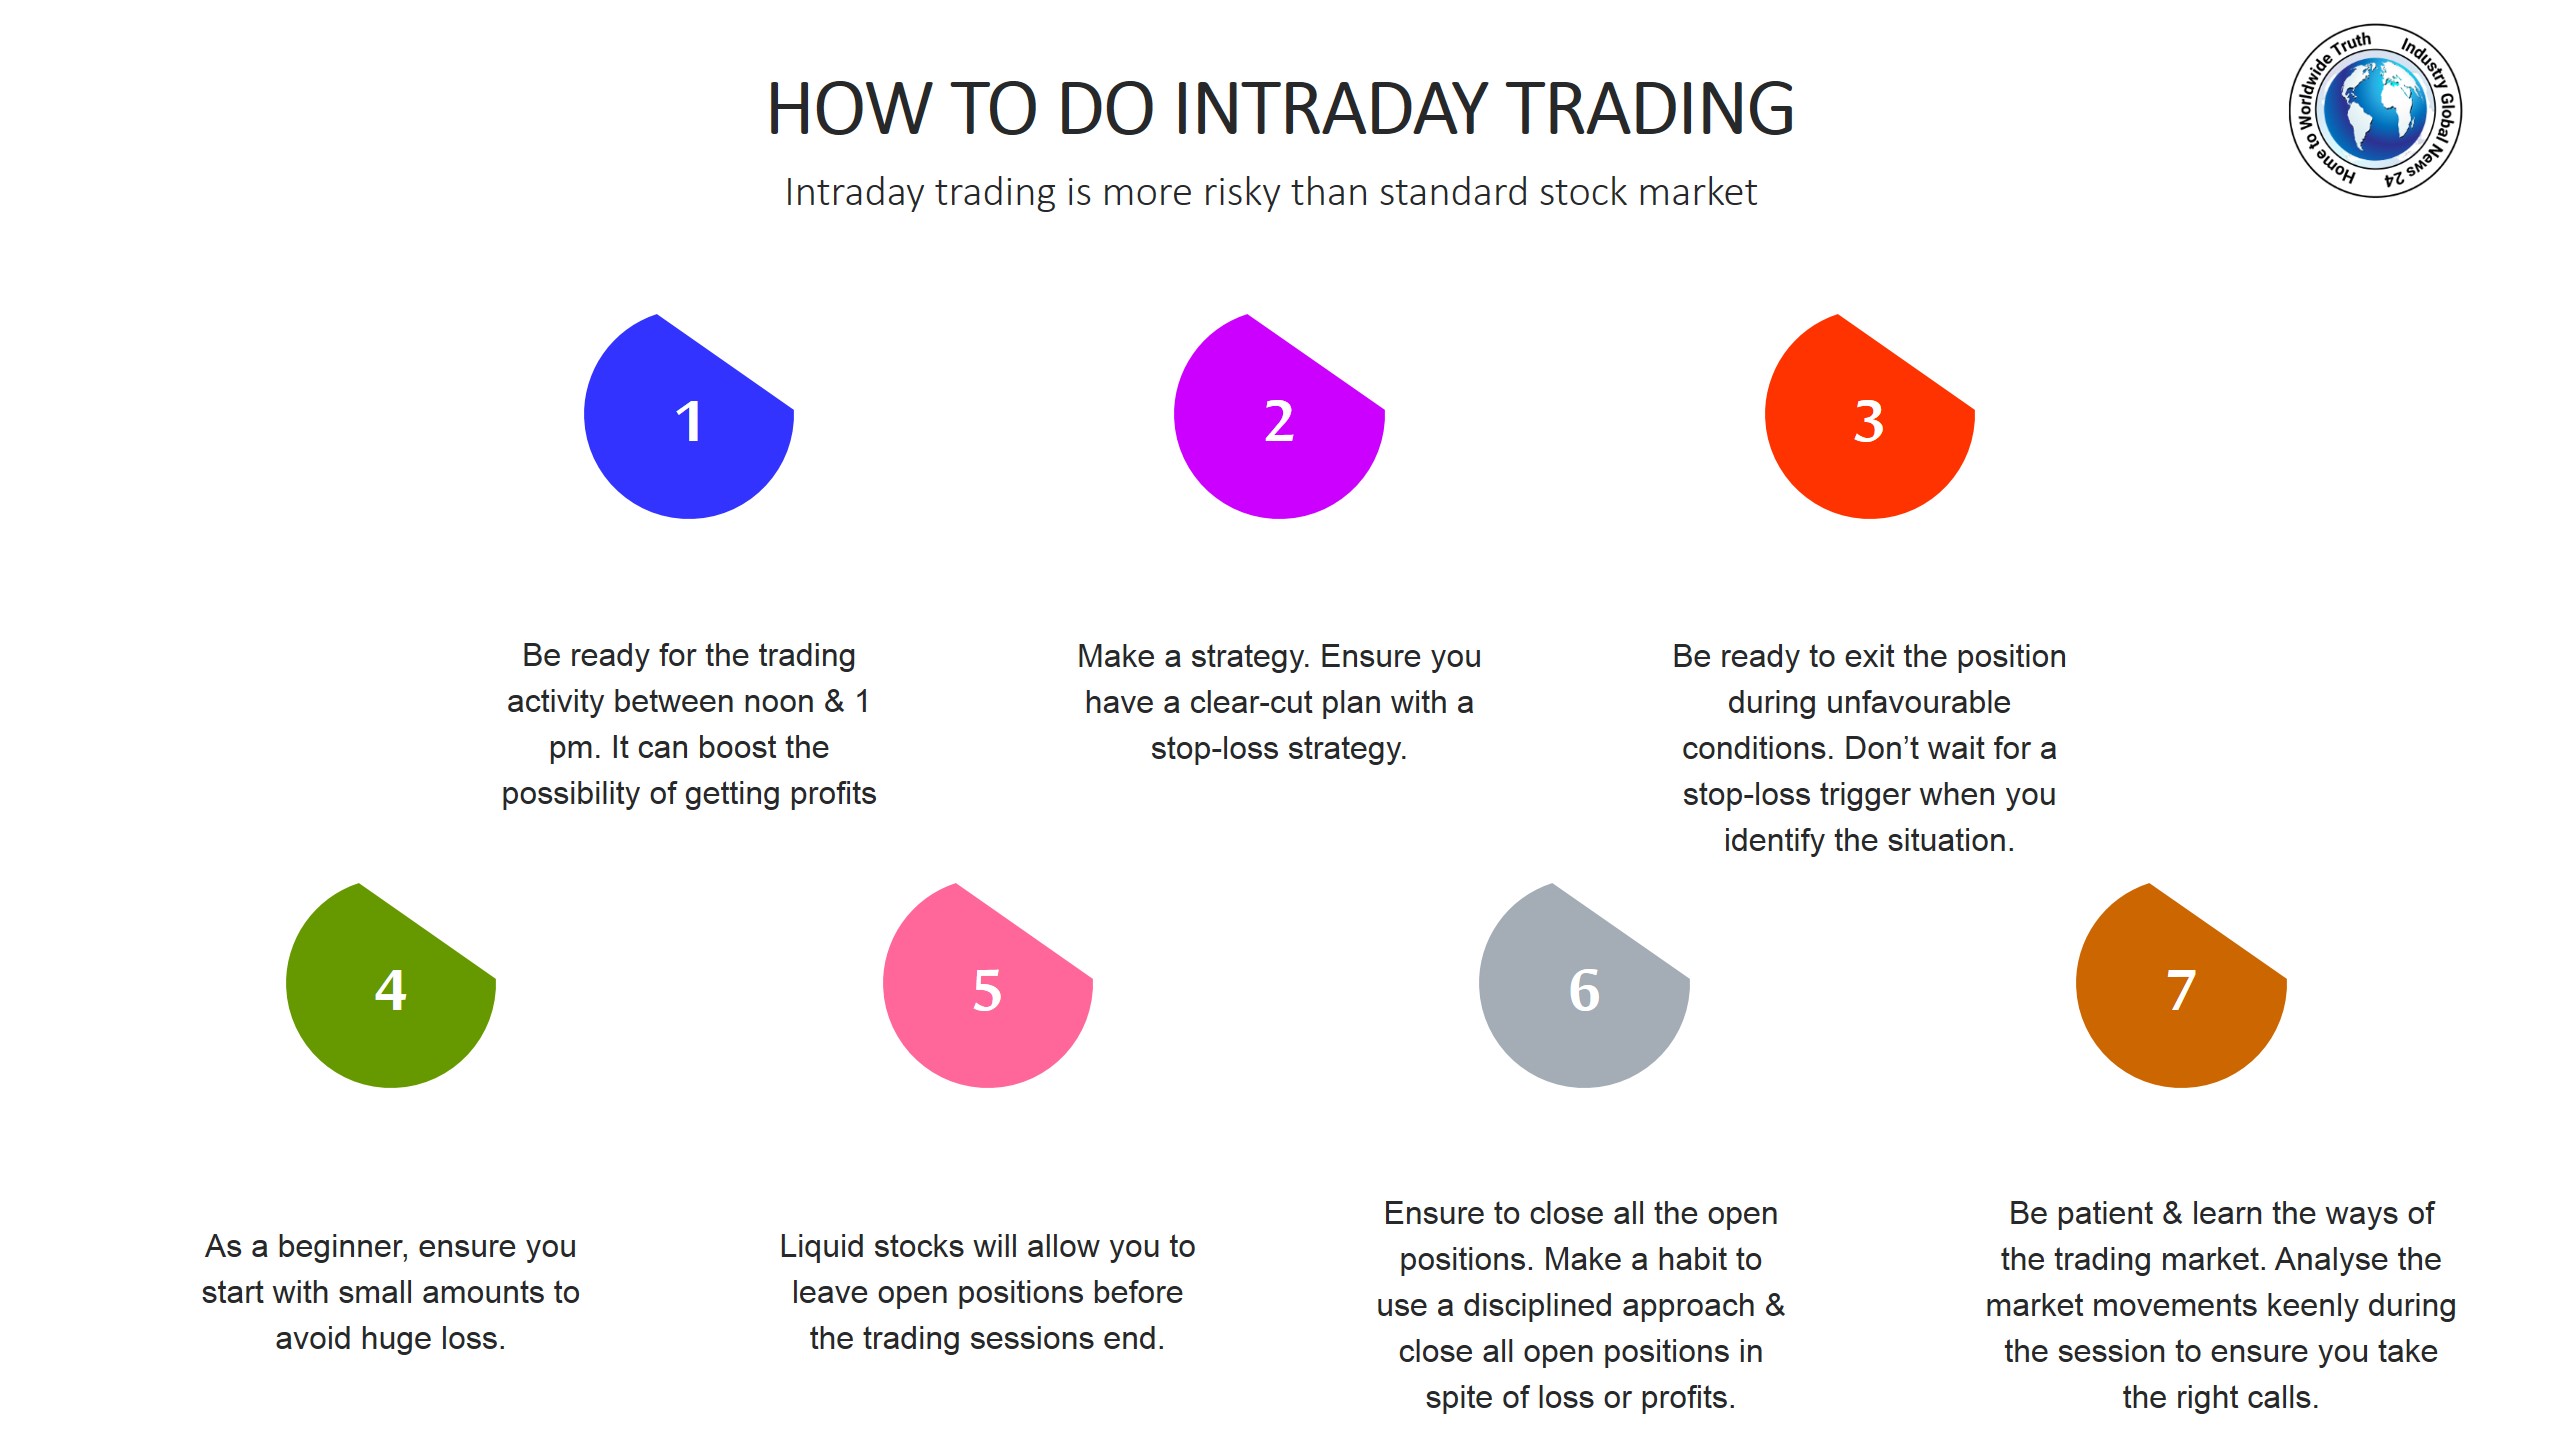 How to do Intraday Trading